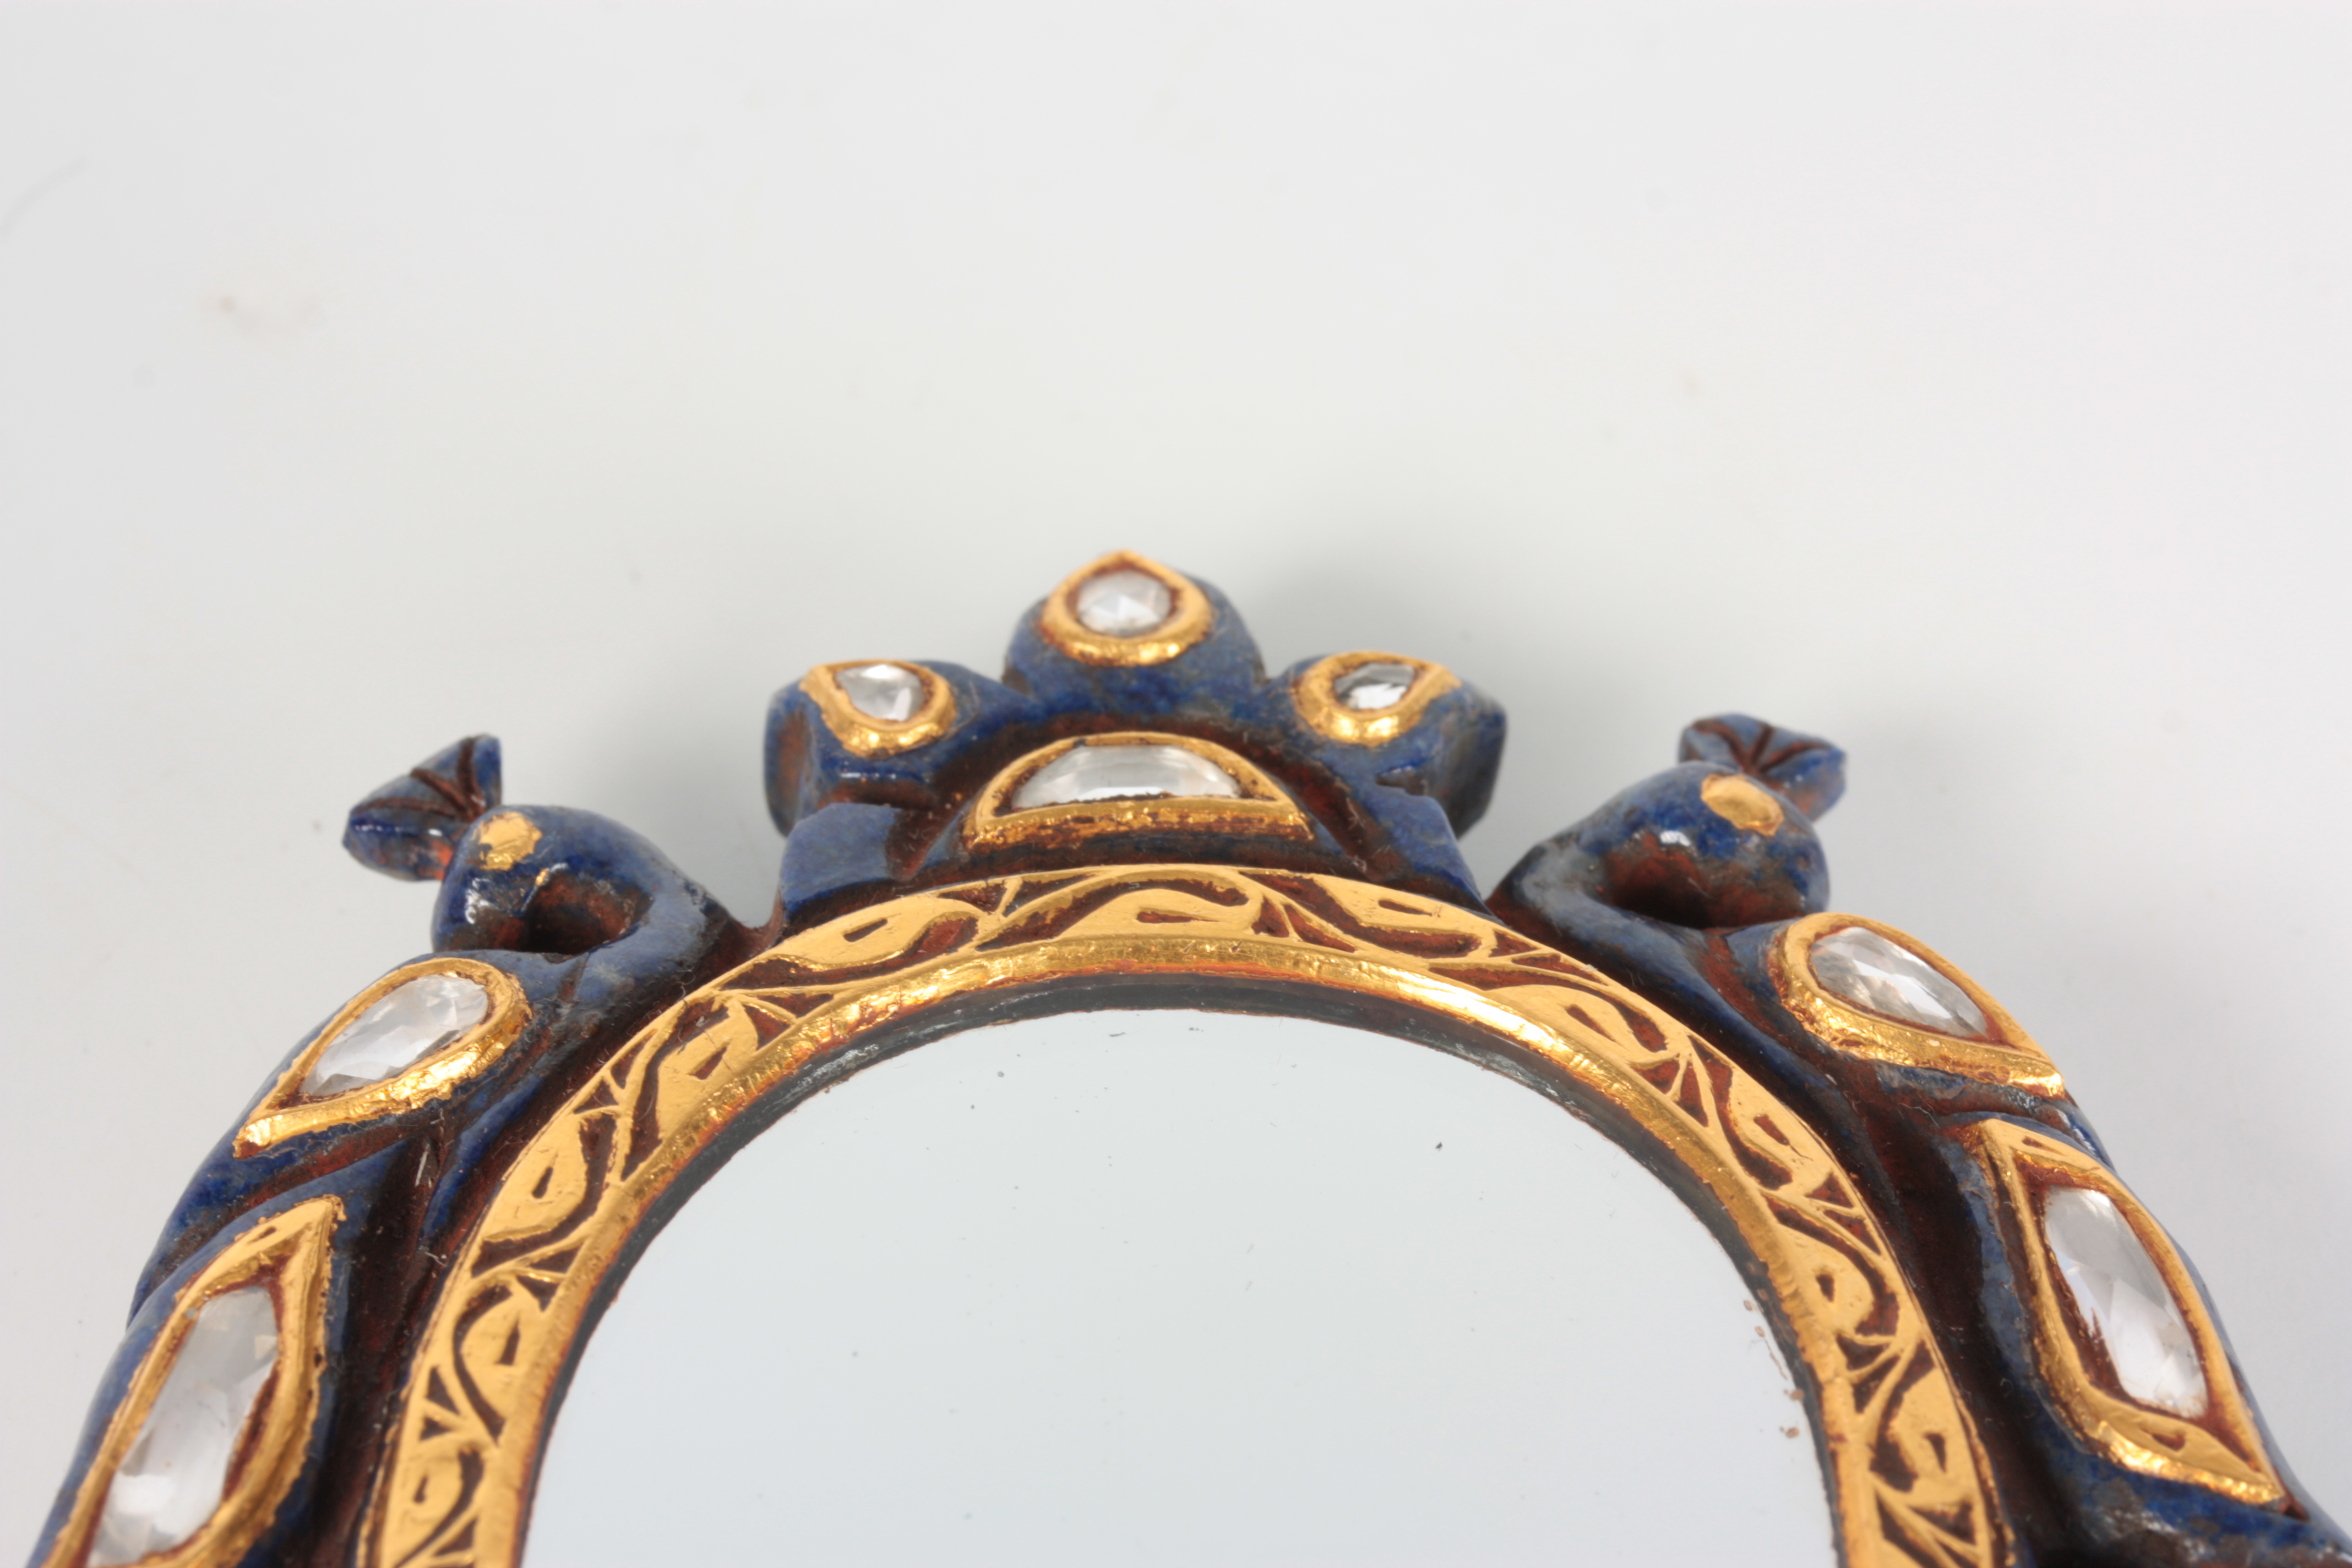 AN 20TH CENTURY LAPIS LAZULI AND DIAMOND SET CARVED HAND MIRROR the peacock and twisted handle - Image 5 of 6